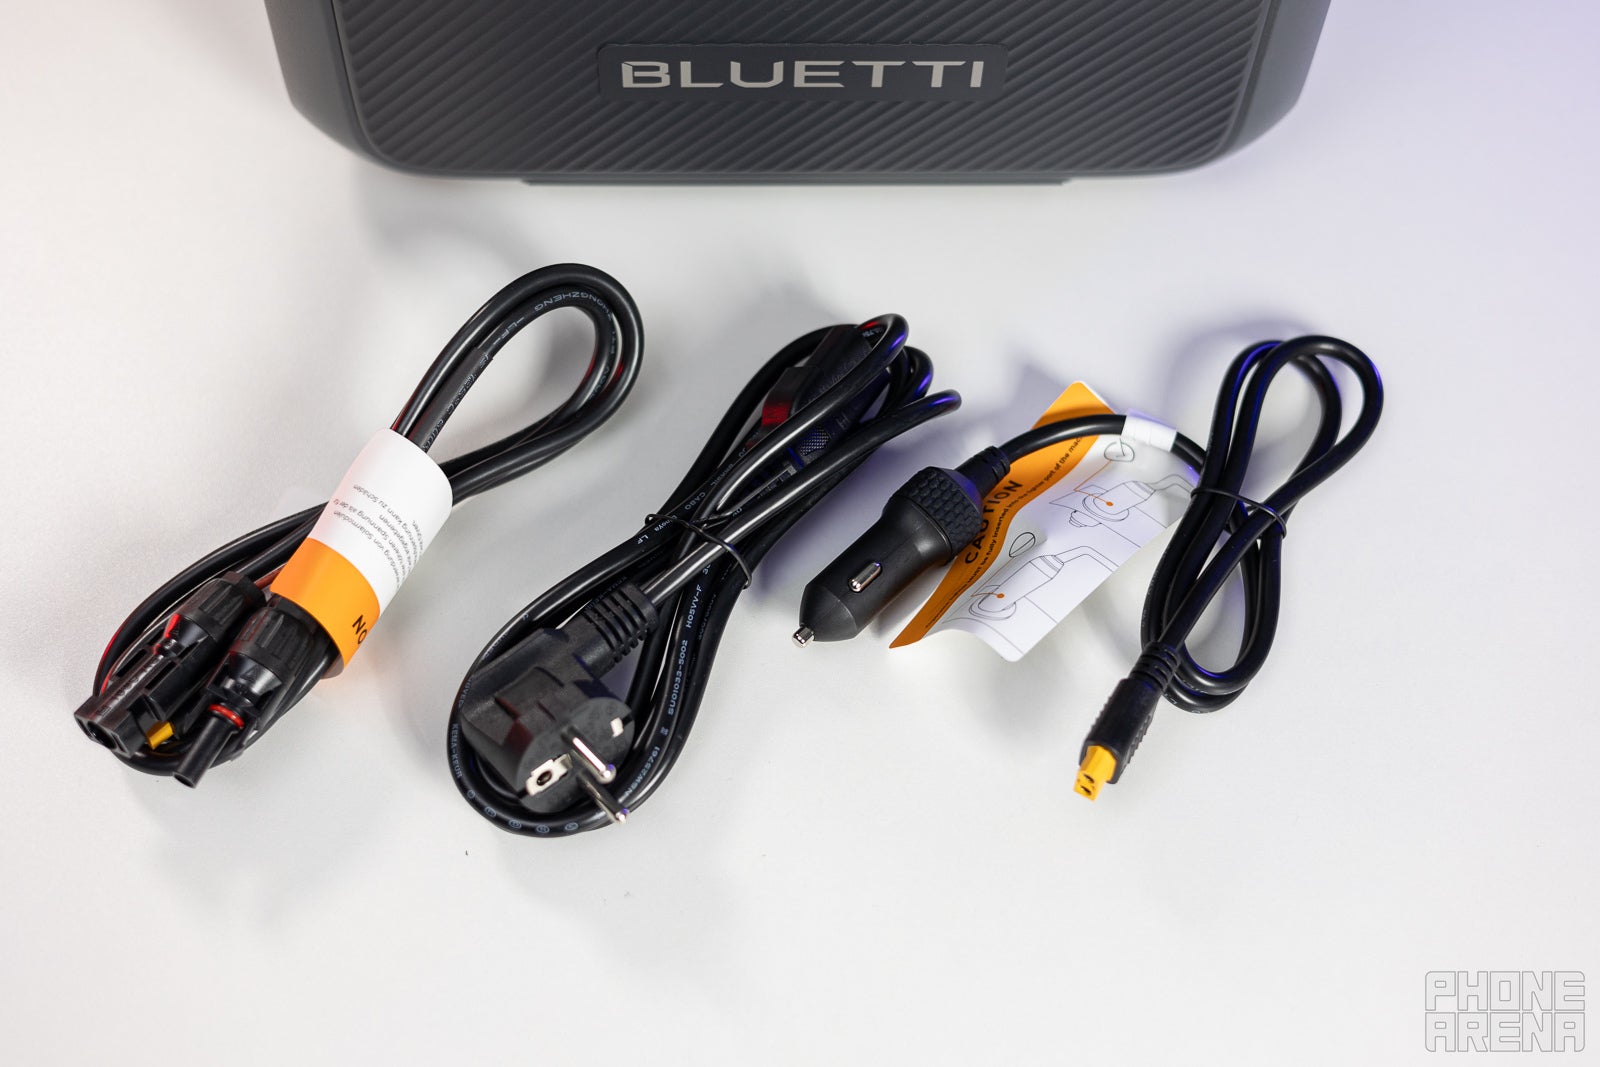 Bluetti AC70 Review: affordable and reliable power buddy